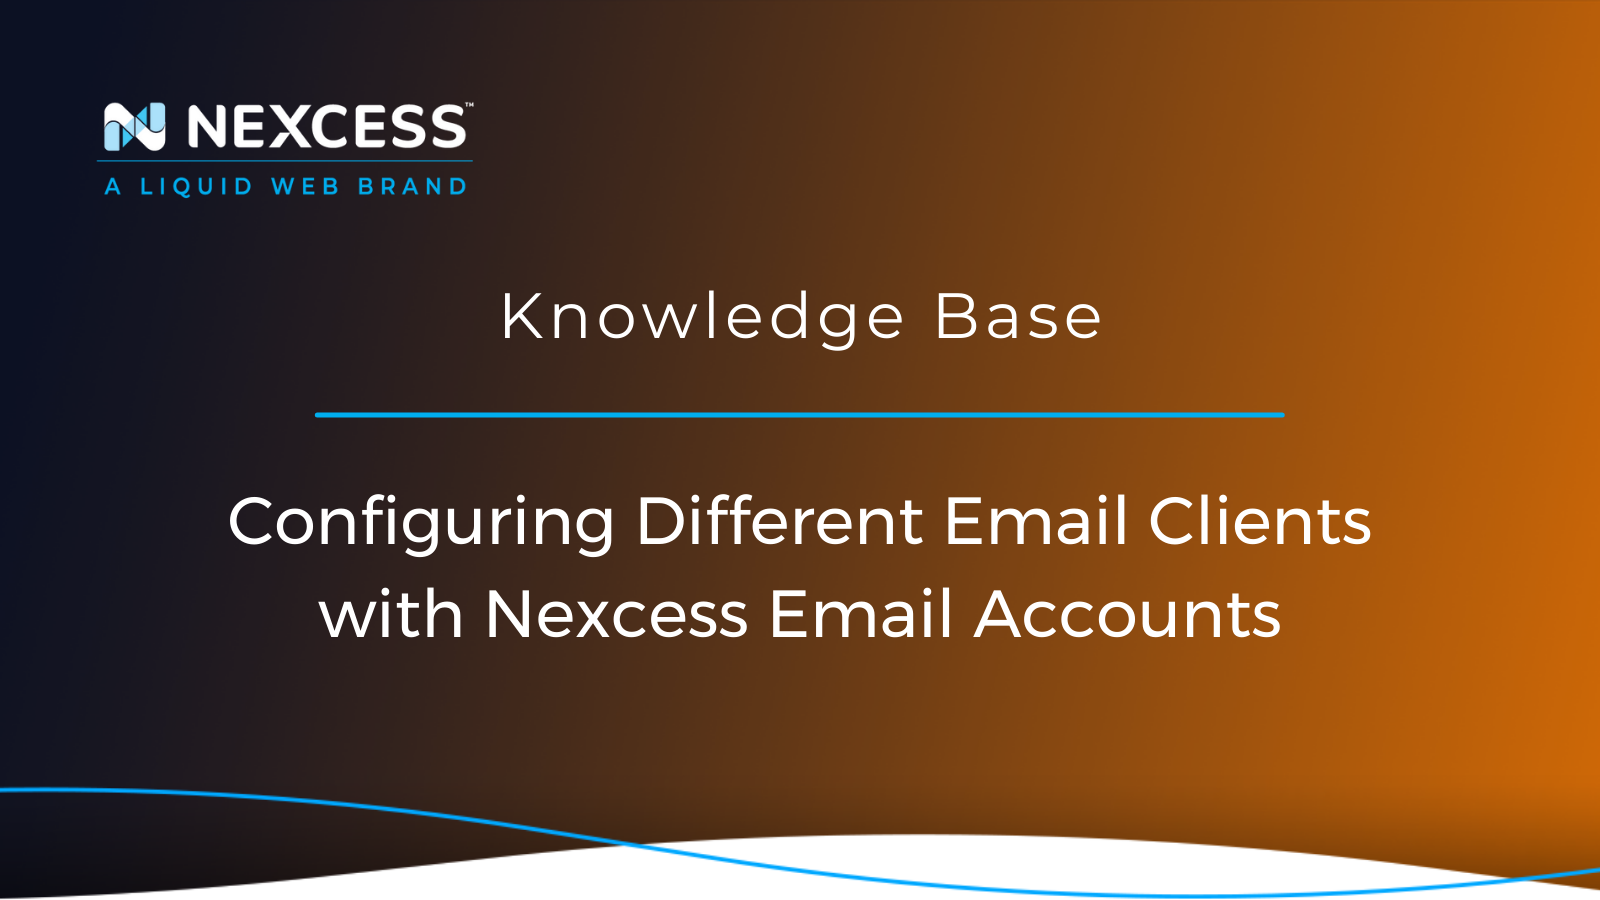 Configuring Different Email Clients with Nexcess Email Accounts